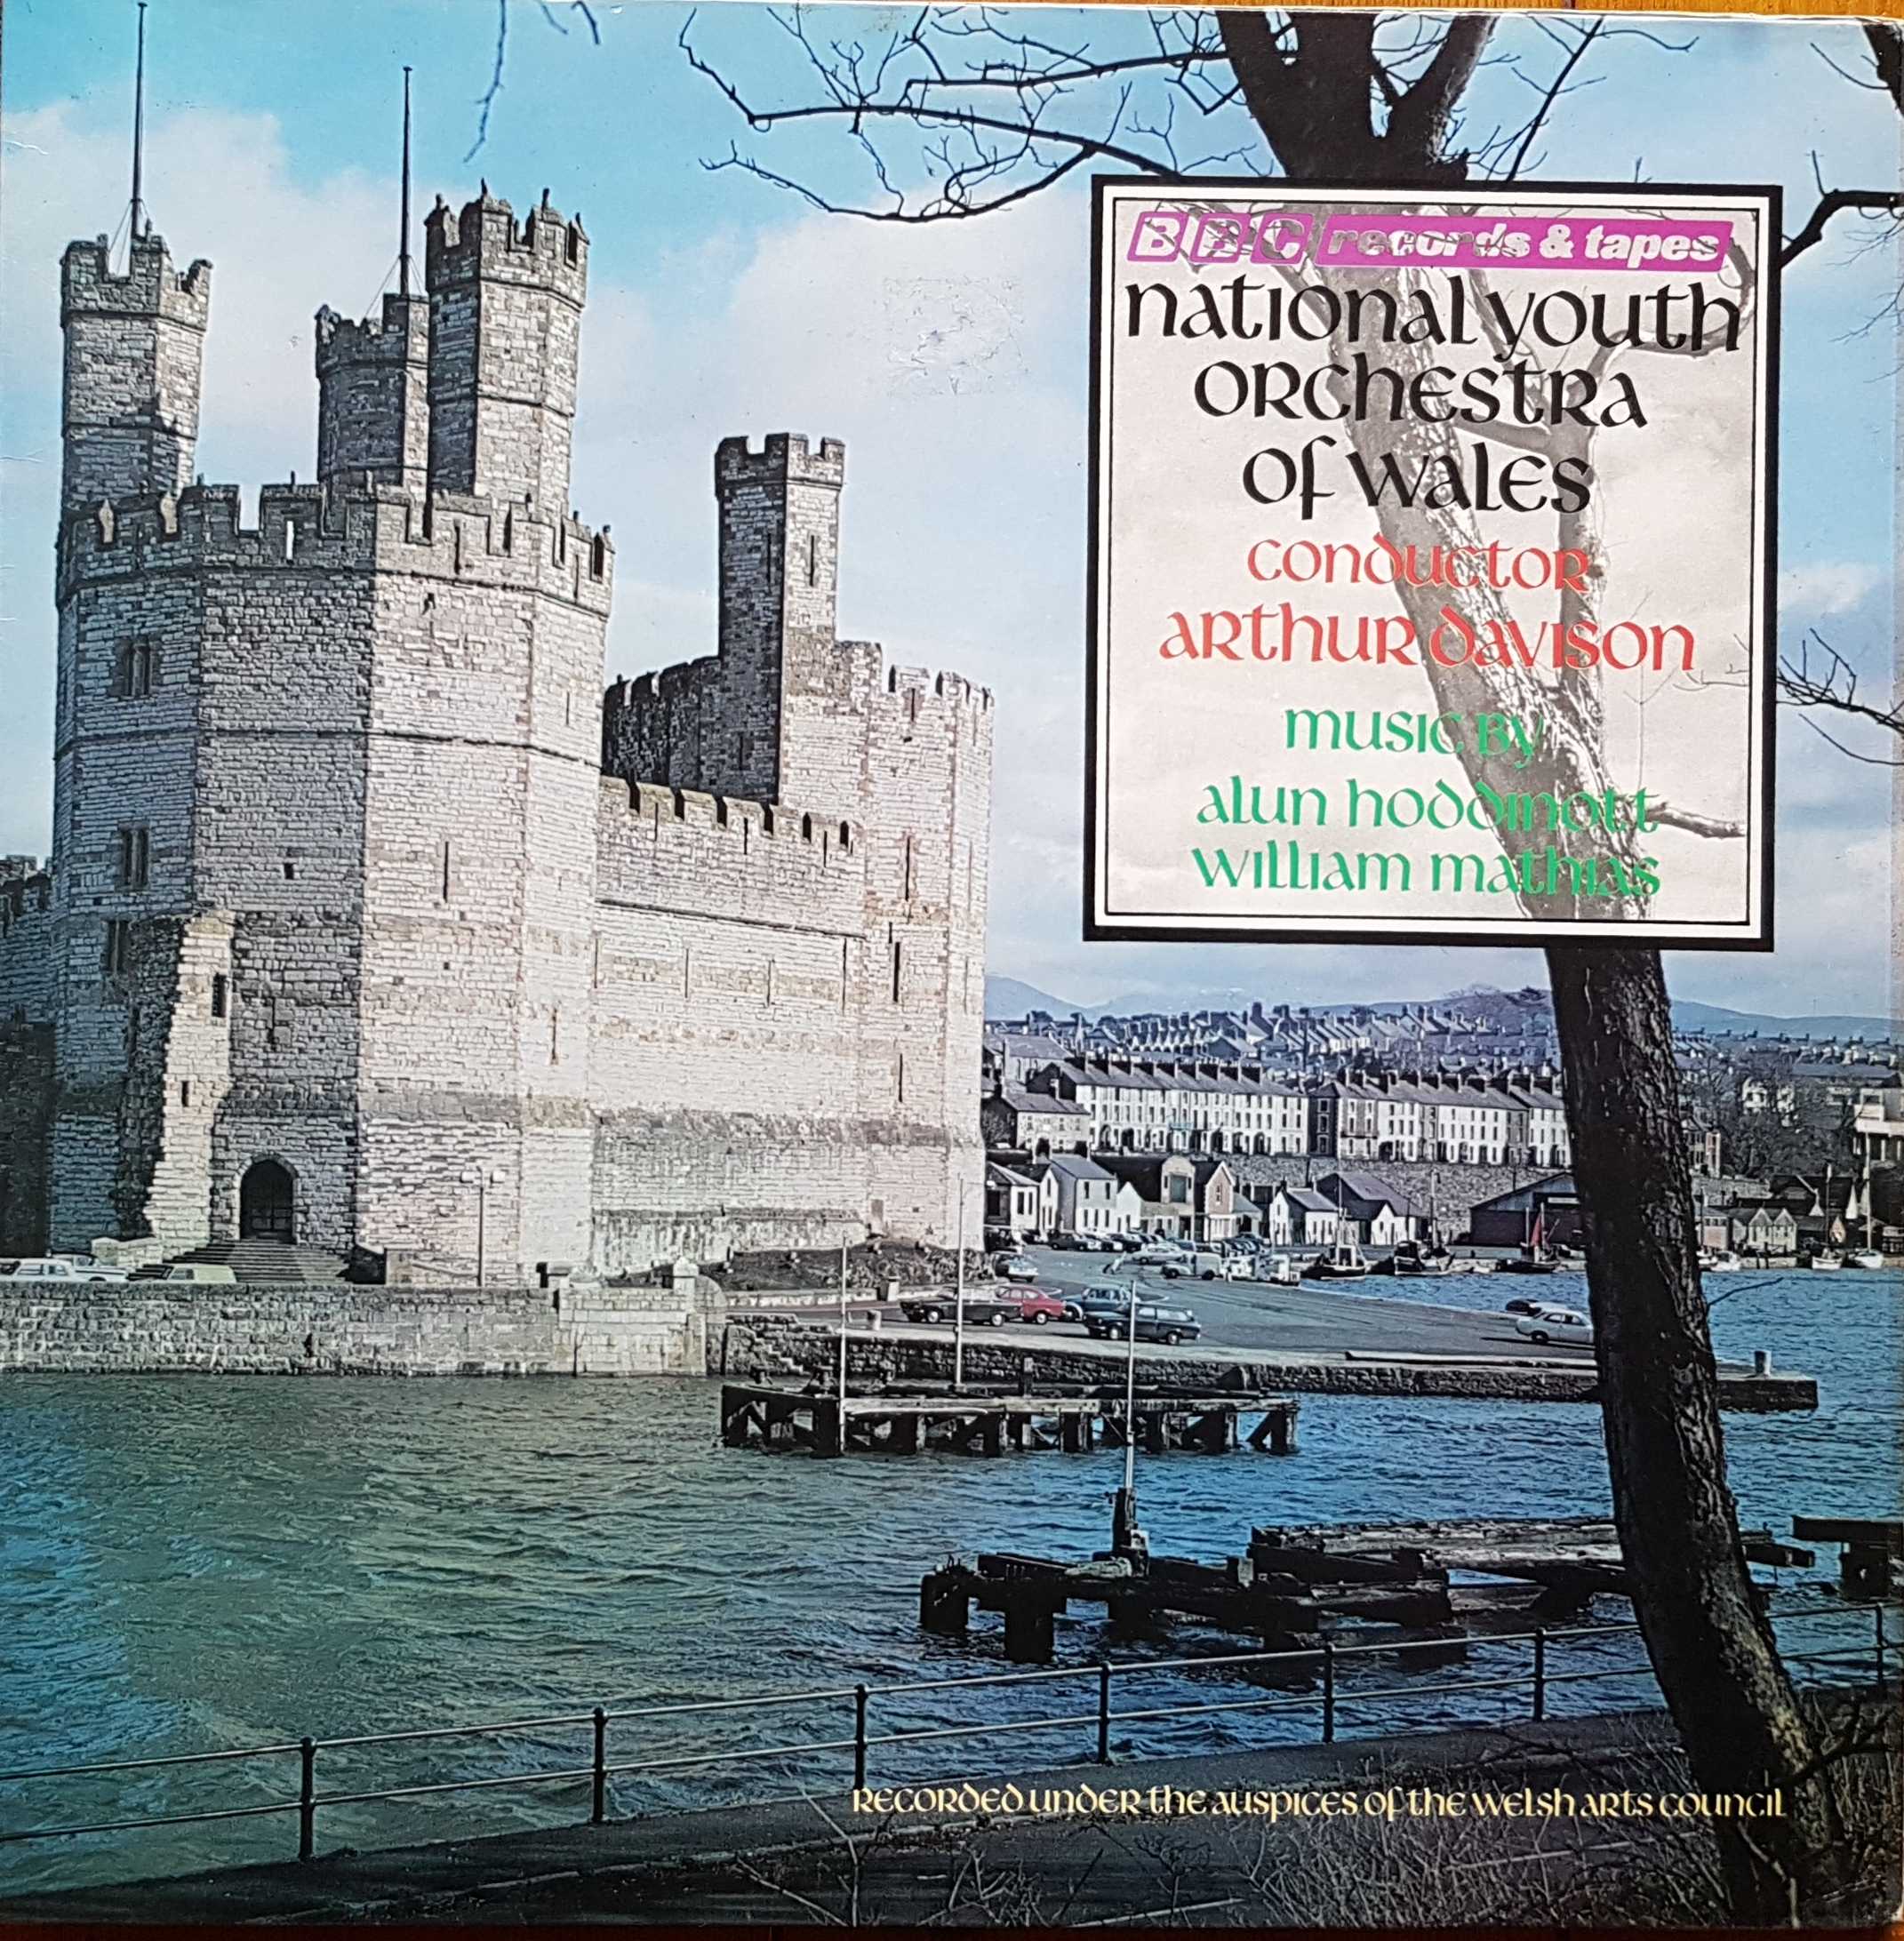 Picture of REC 222 National Youth Orchestra of Wales by artist Various from the BBC albums - Records and Tapes library